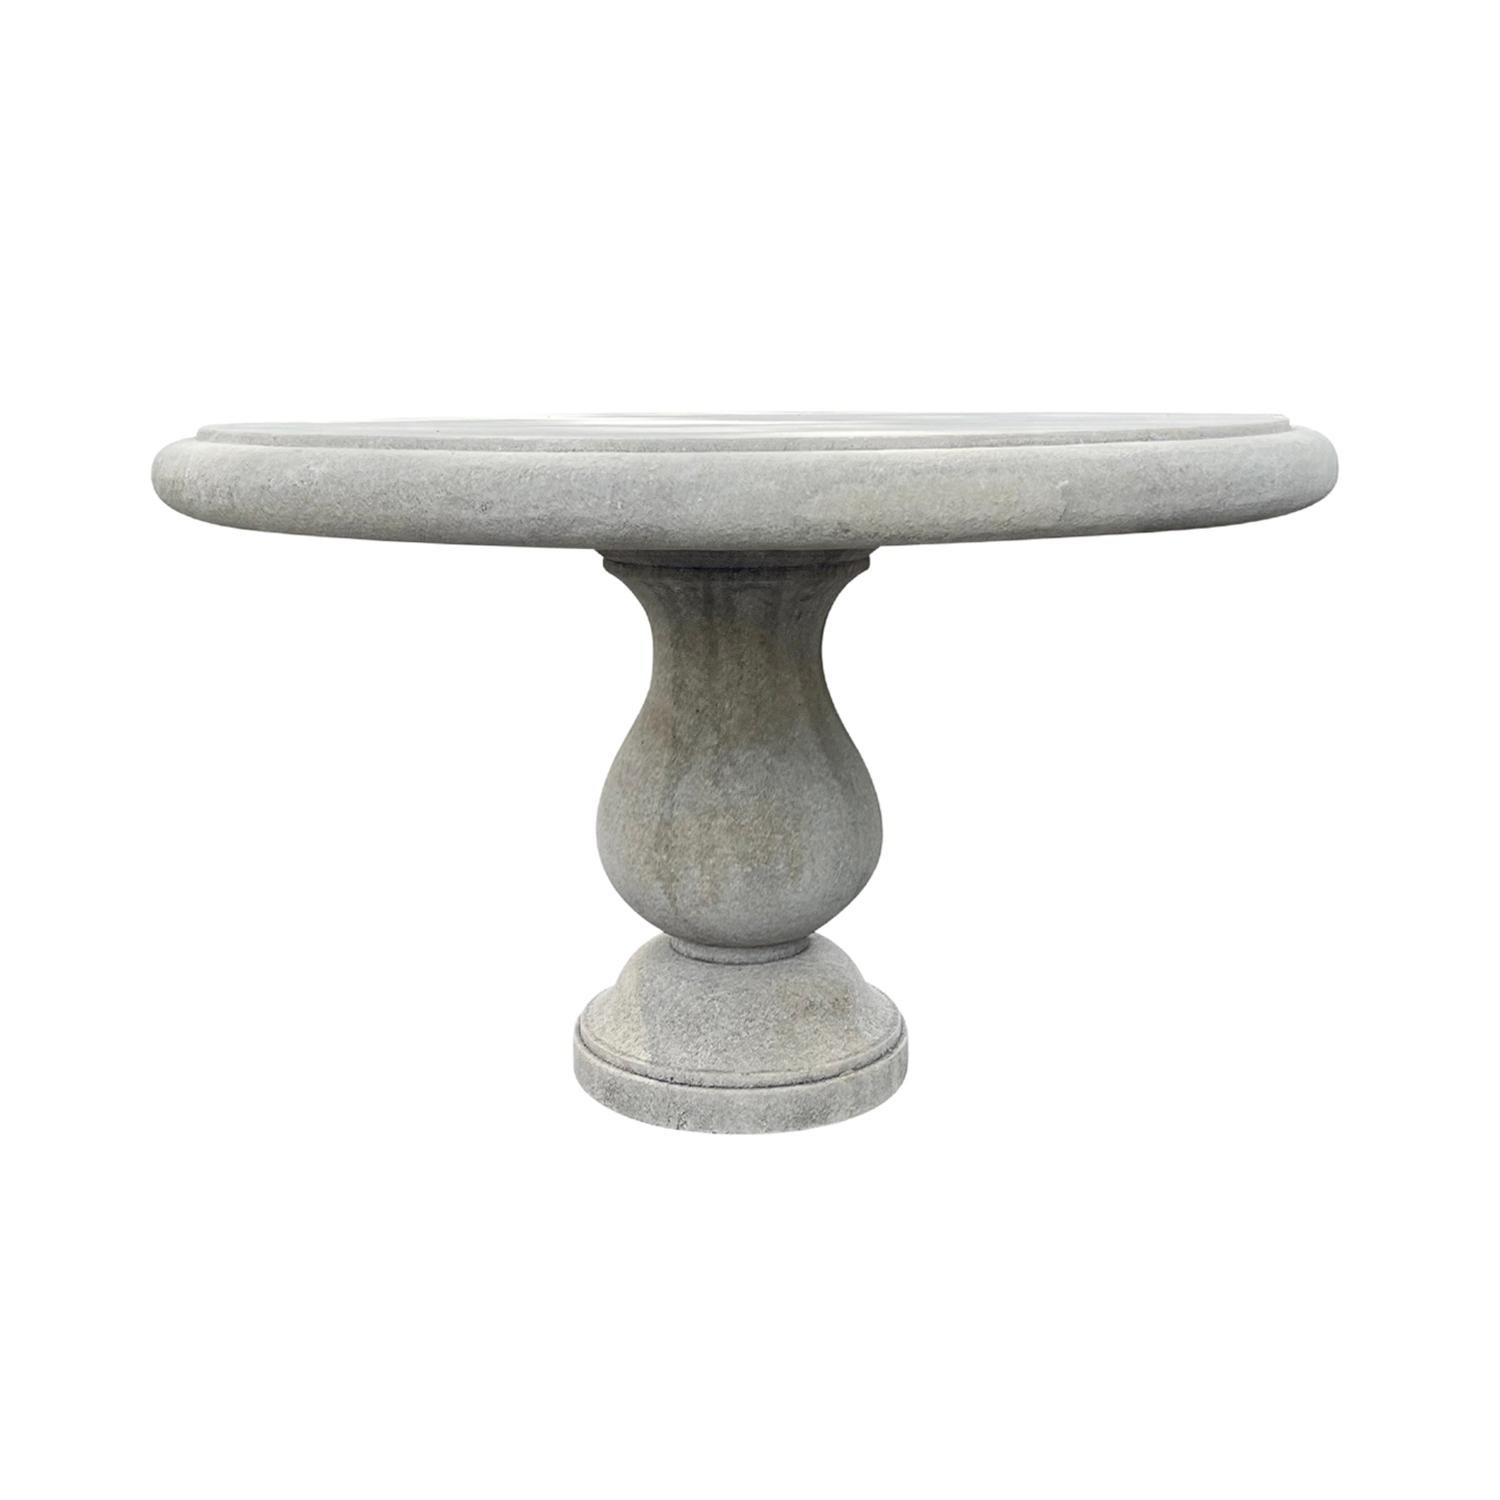 A round garden table hand carved in limestone with a 3.5